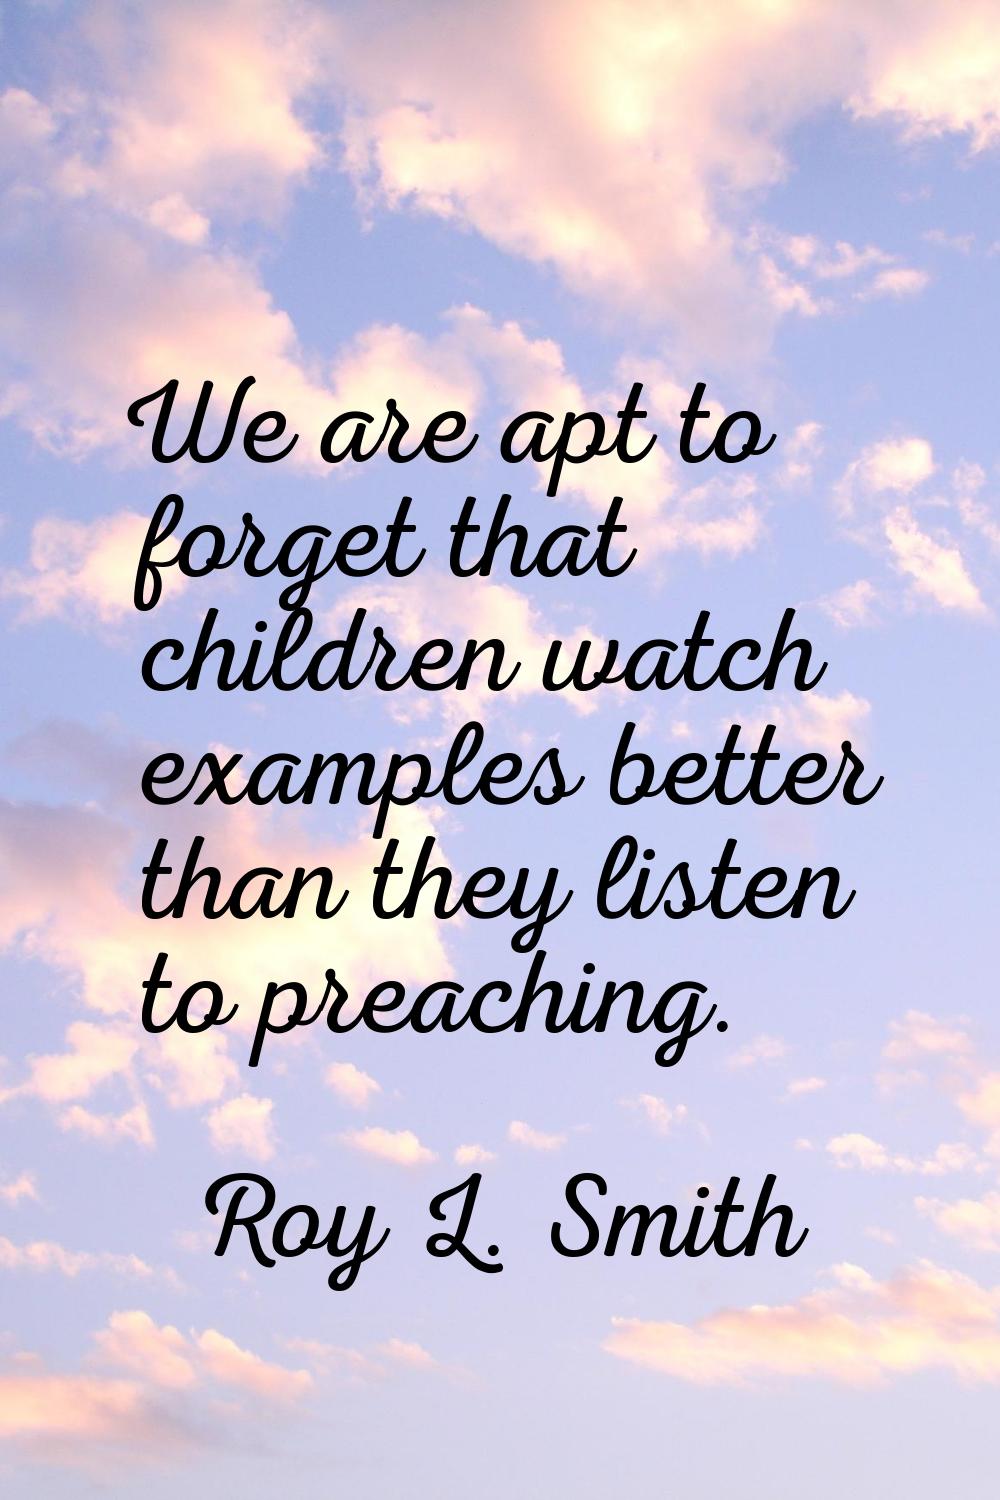 We are apt to forget that children watch examples better than they listen to preaching.